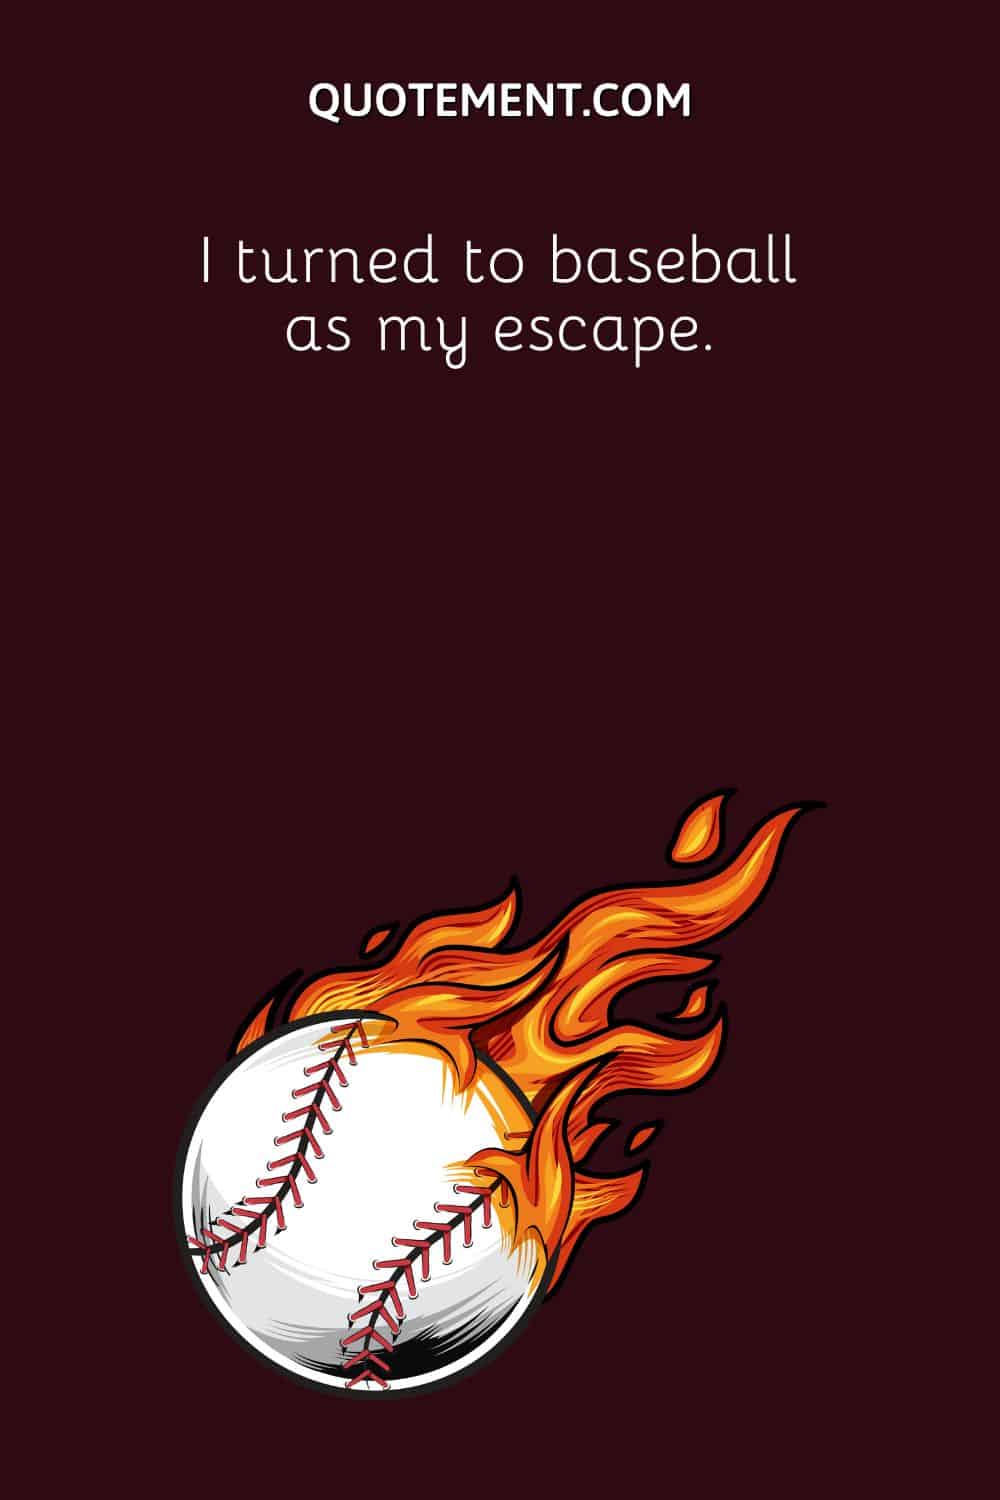 I turned to baseball as my escape